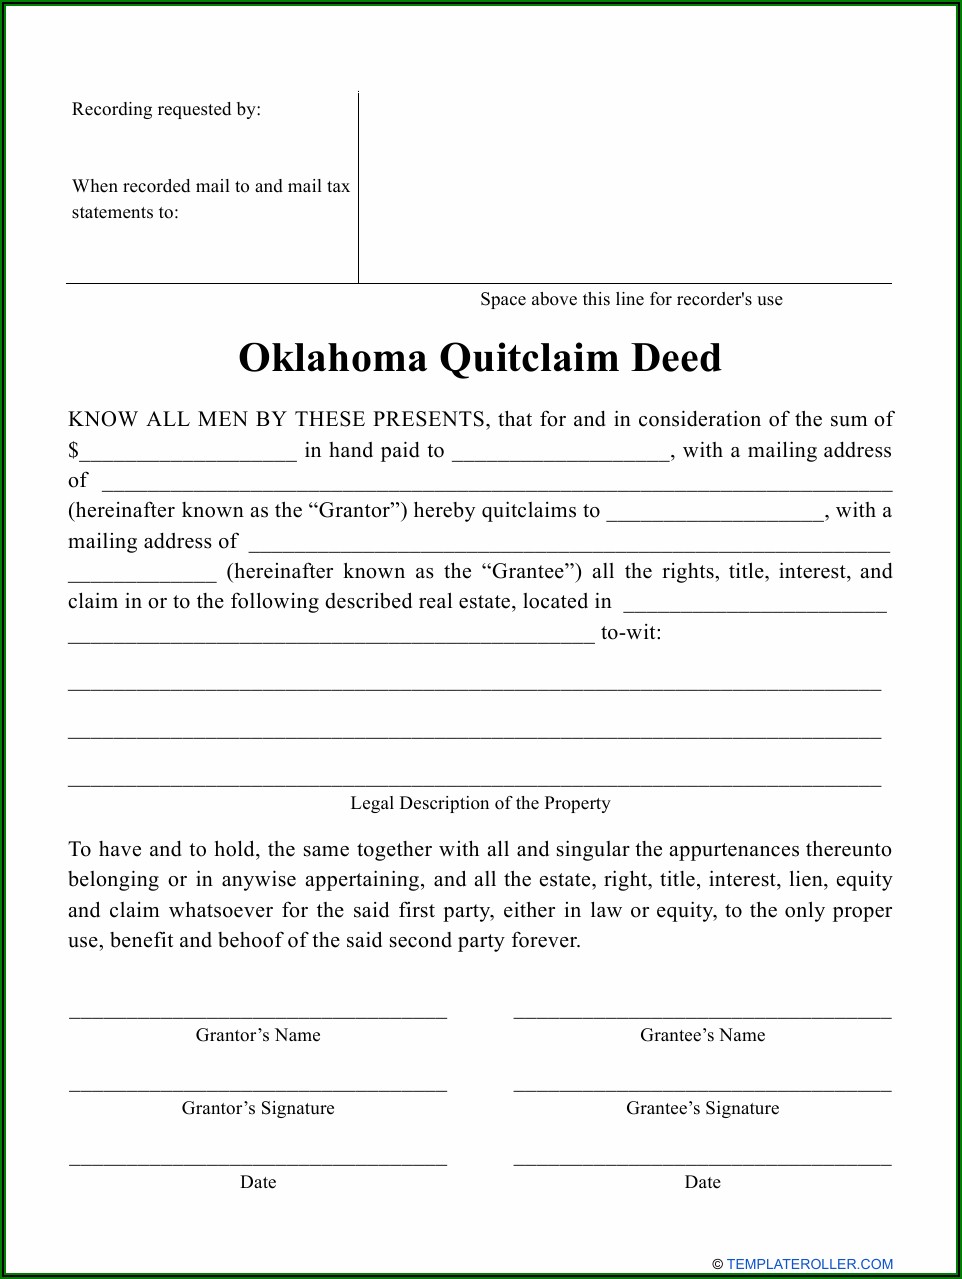 Oklahoma Quit Claim Deed Form Free Download